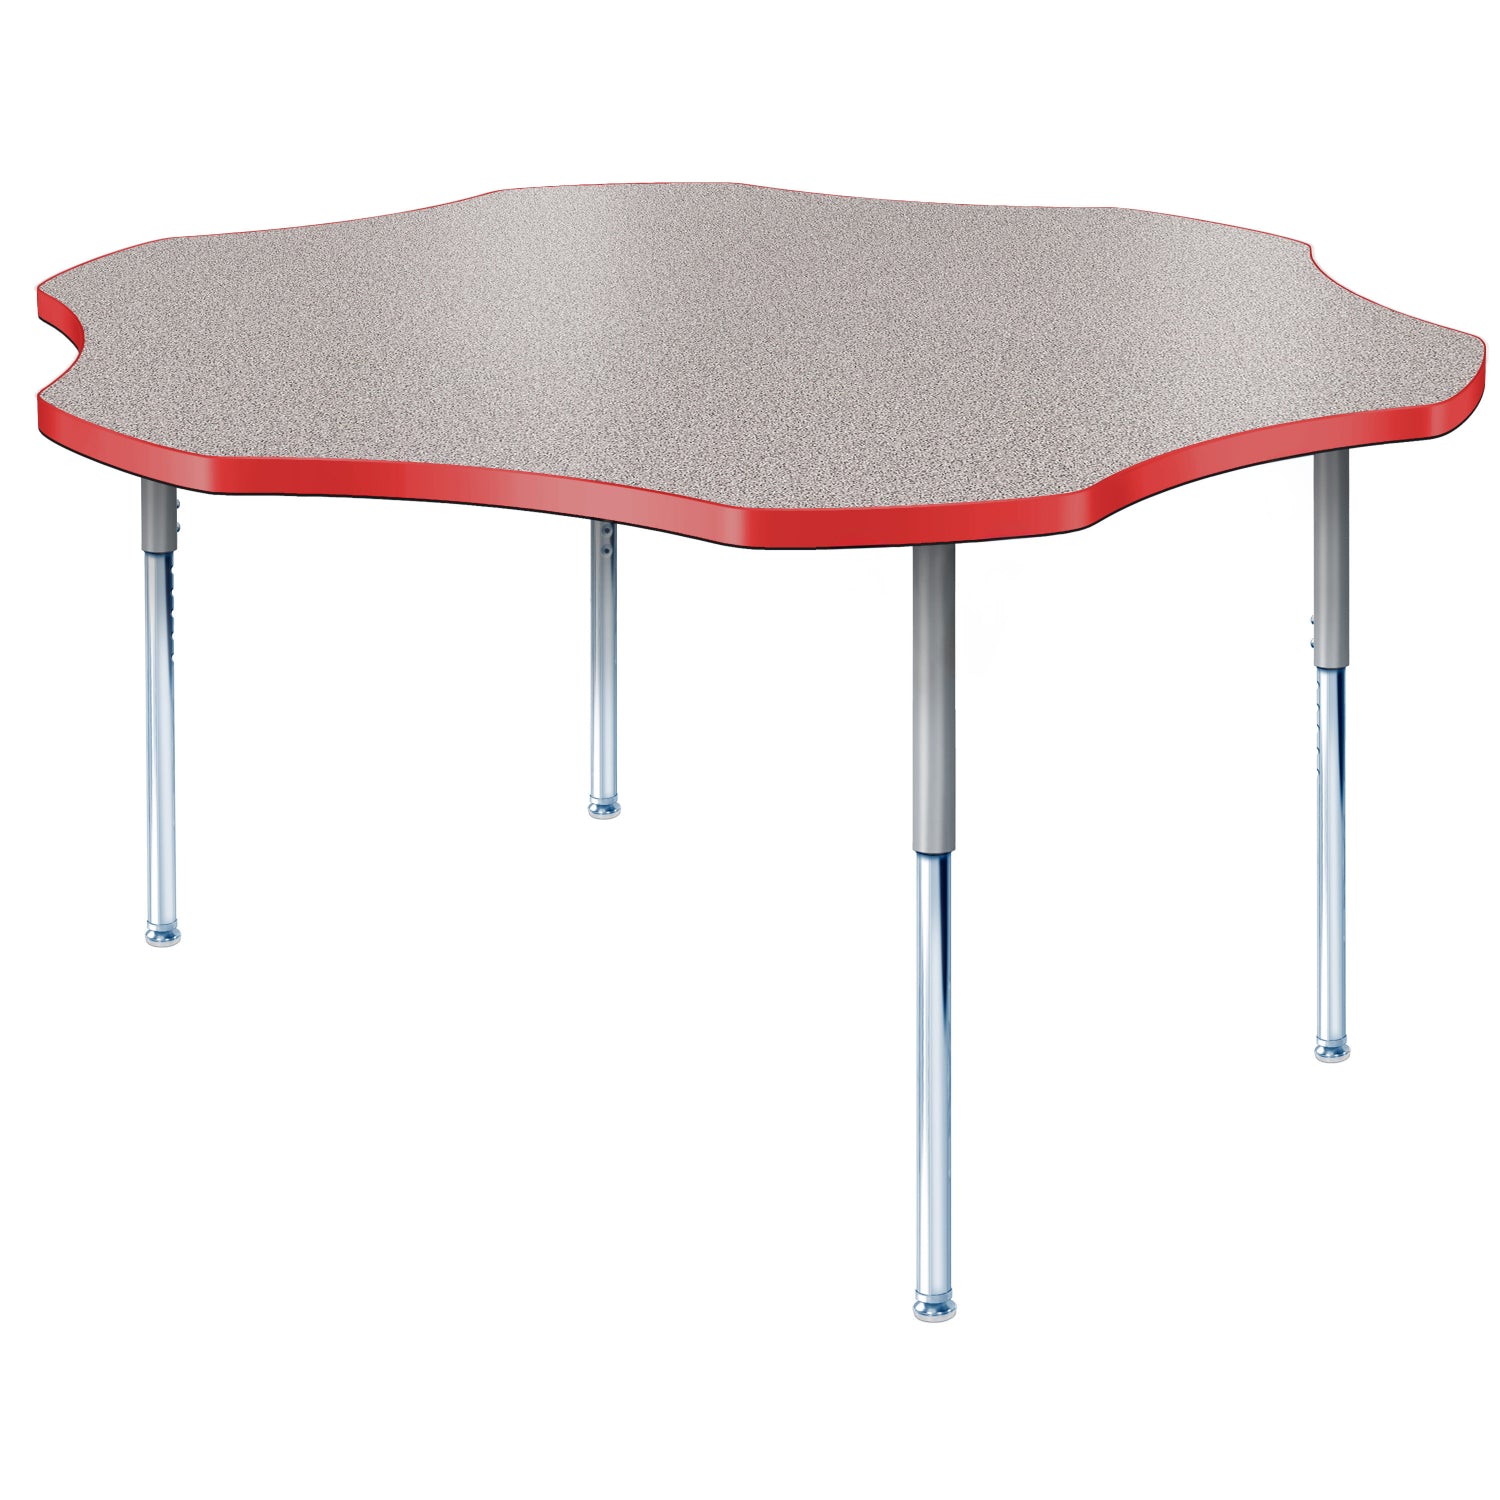 Modern Classic Series 60 x 60" Flower Activity Table with High Pressure Laminate Top, Adjustable Height Legs